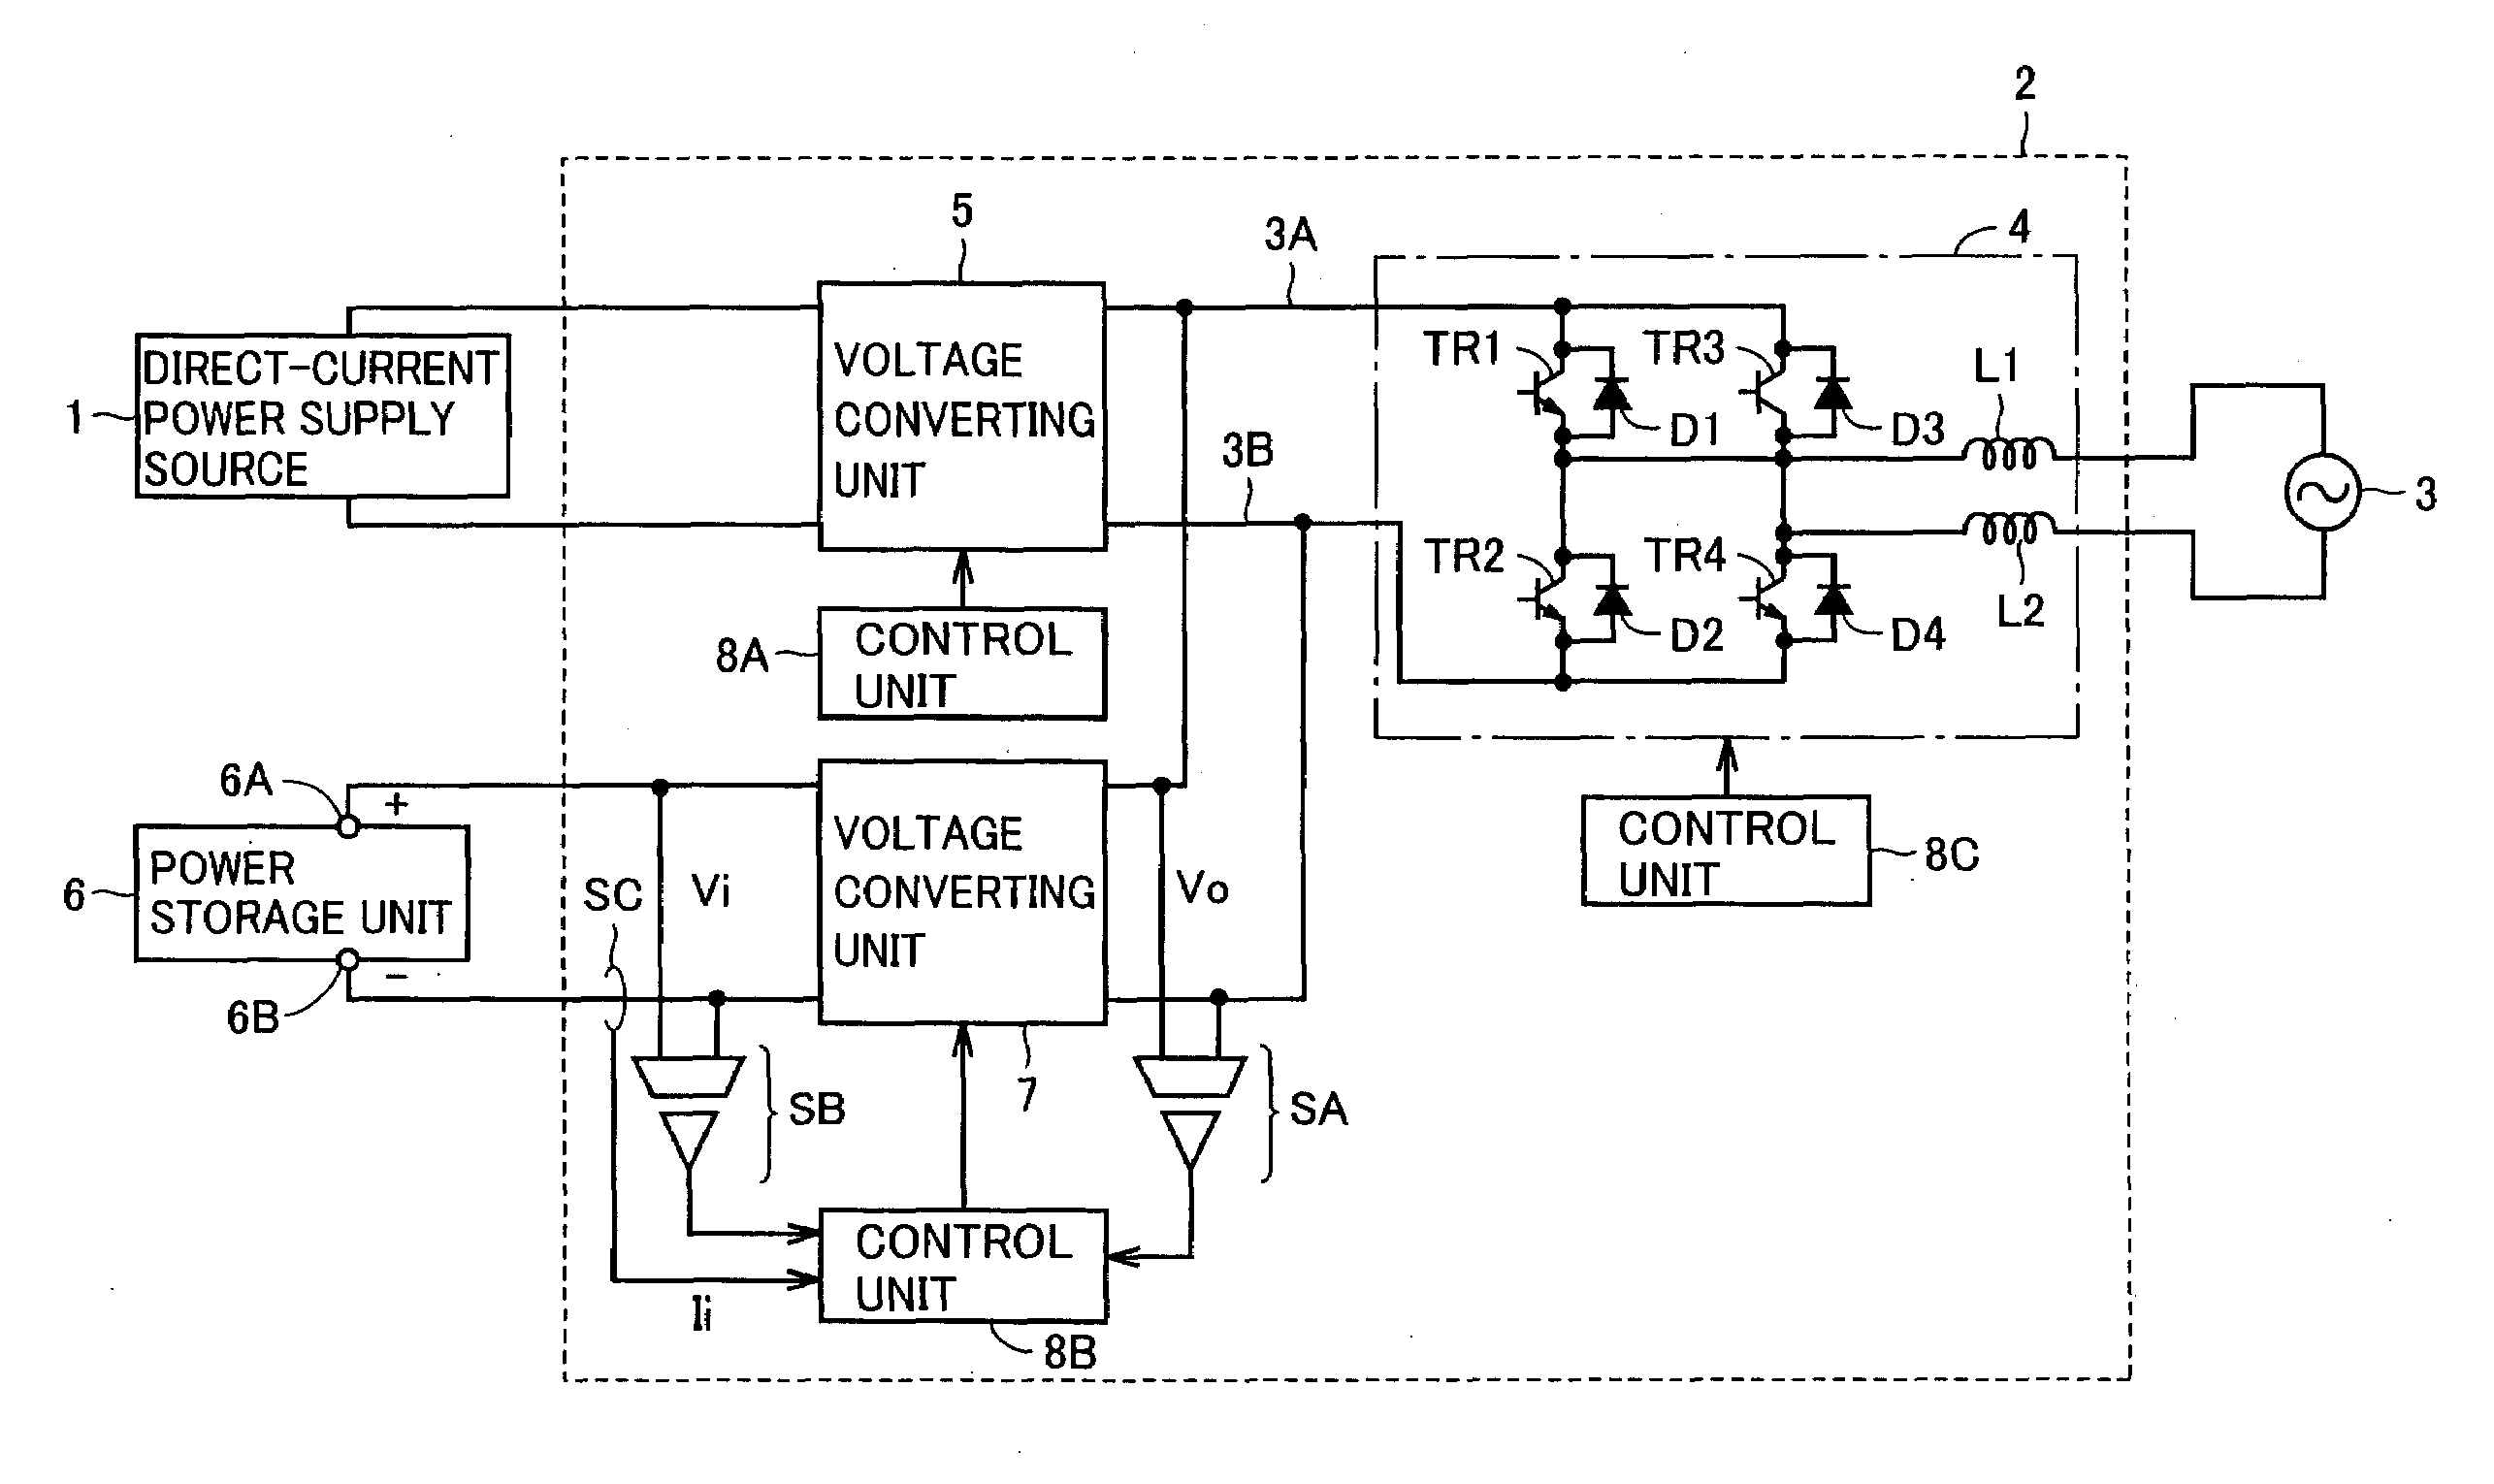 Grid-Connected Power Conditioner and Grid-Connected Power Supply System